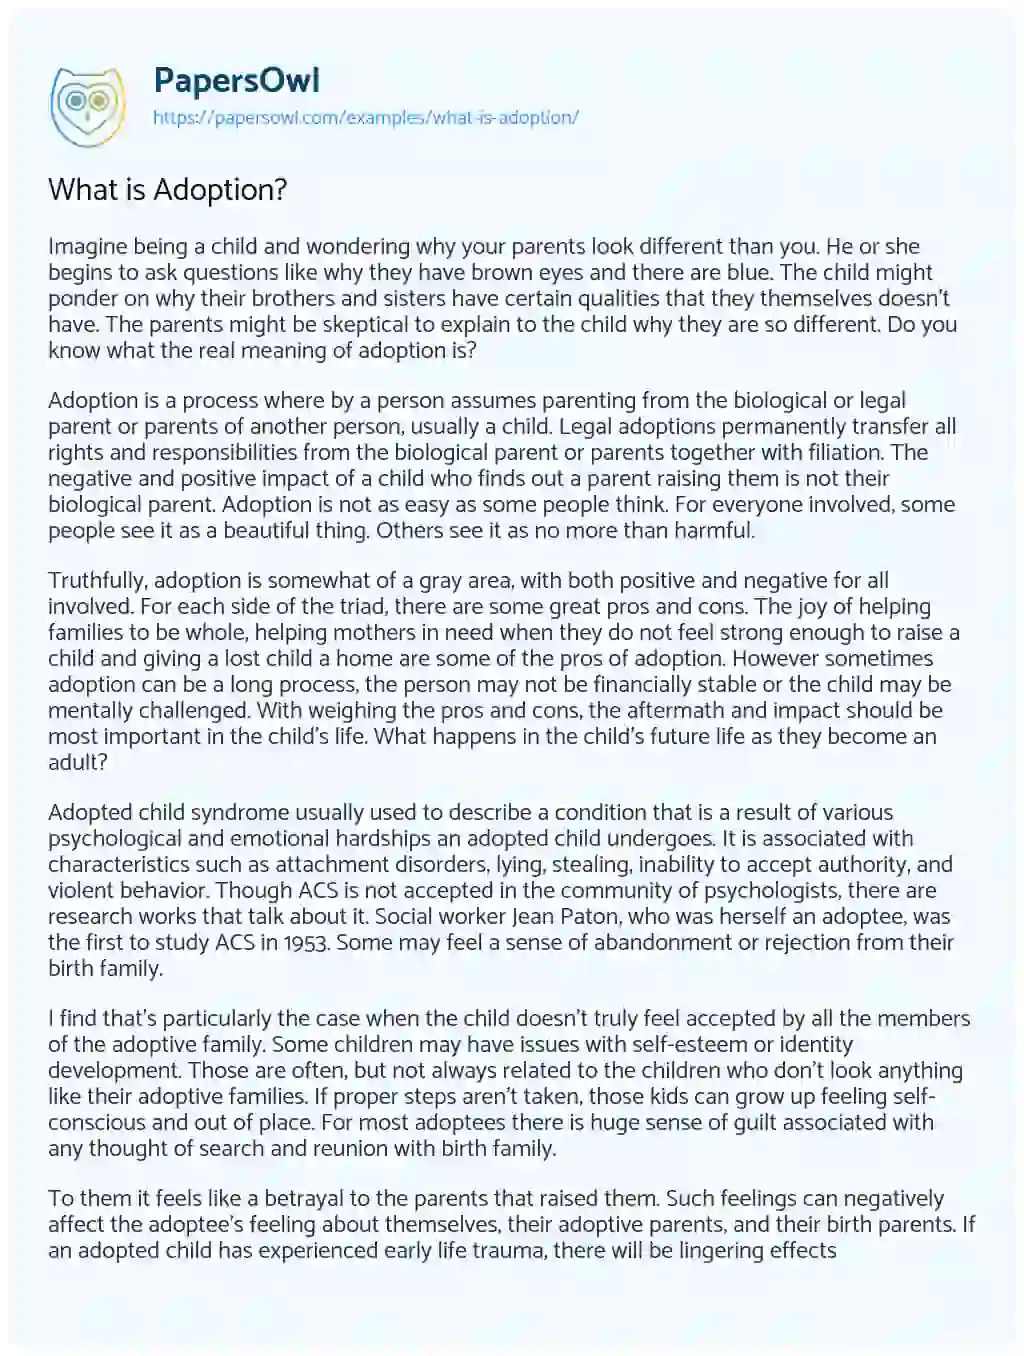 Essay on What is Adoption?